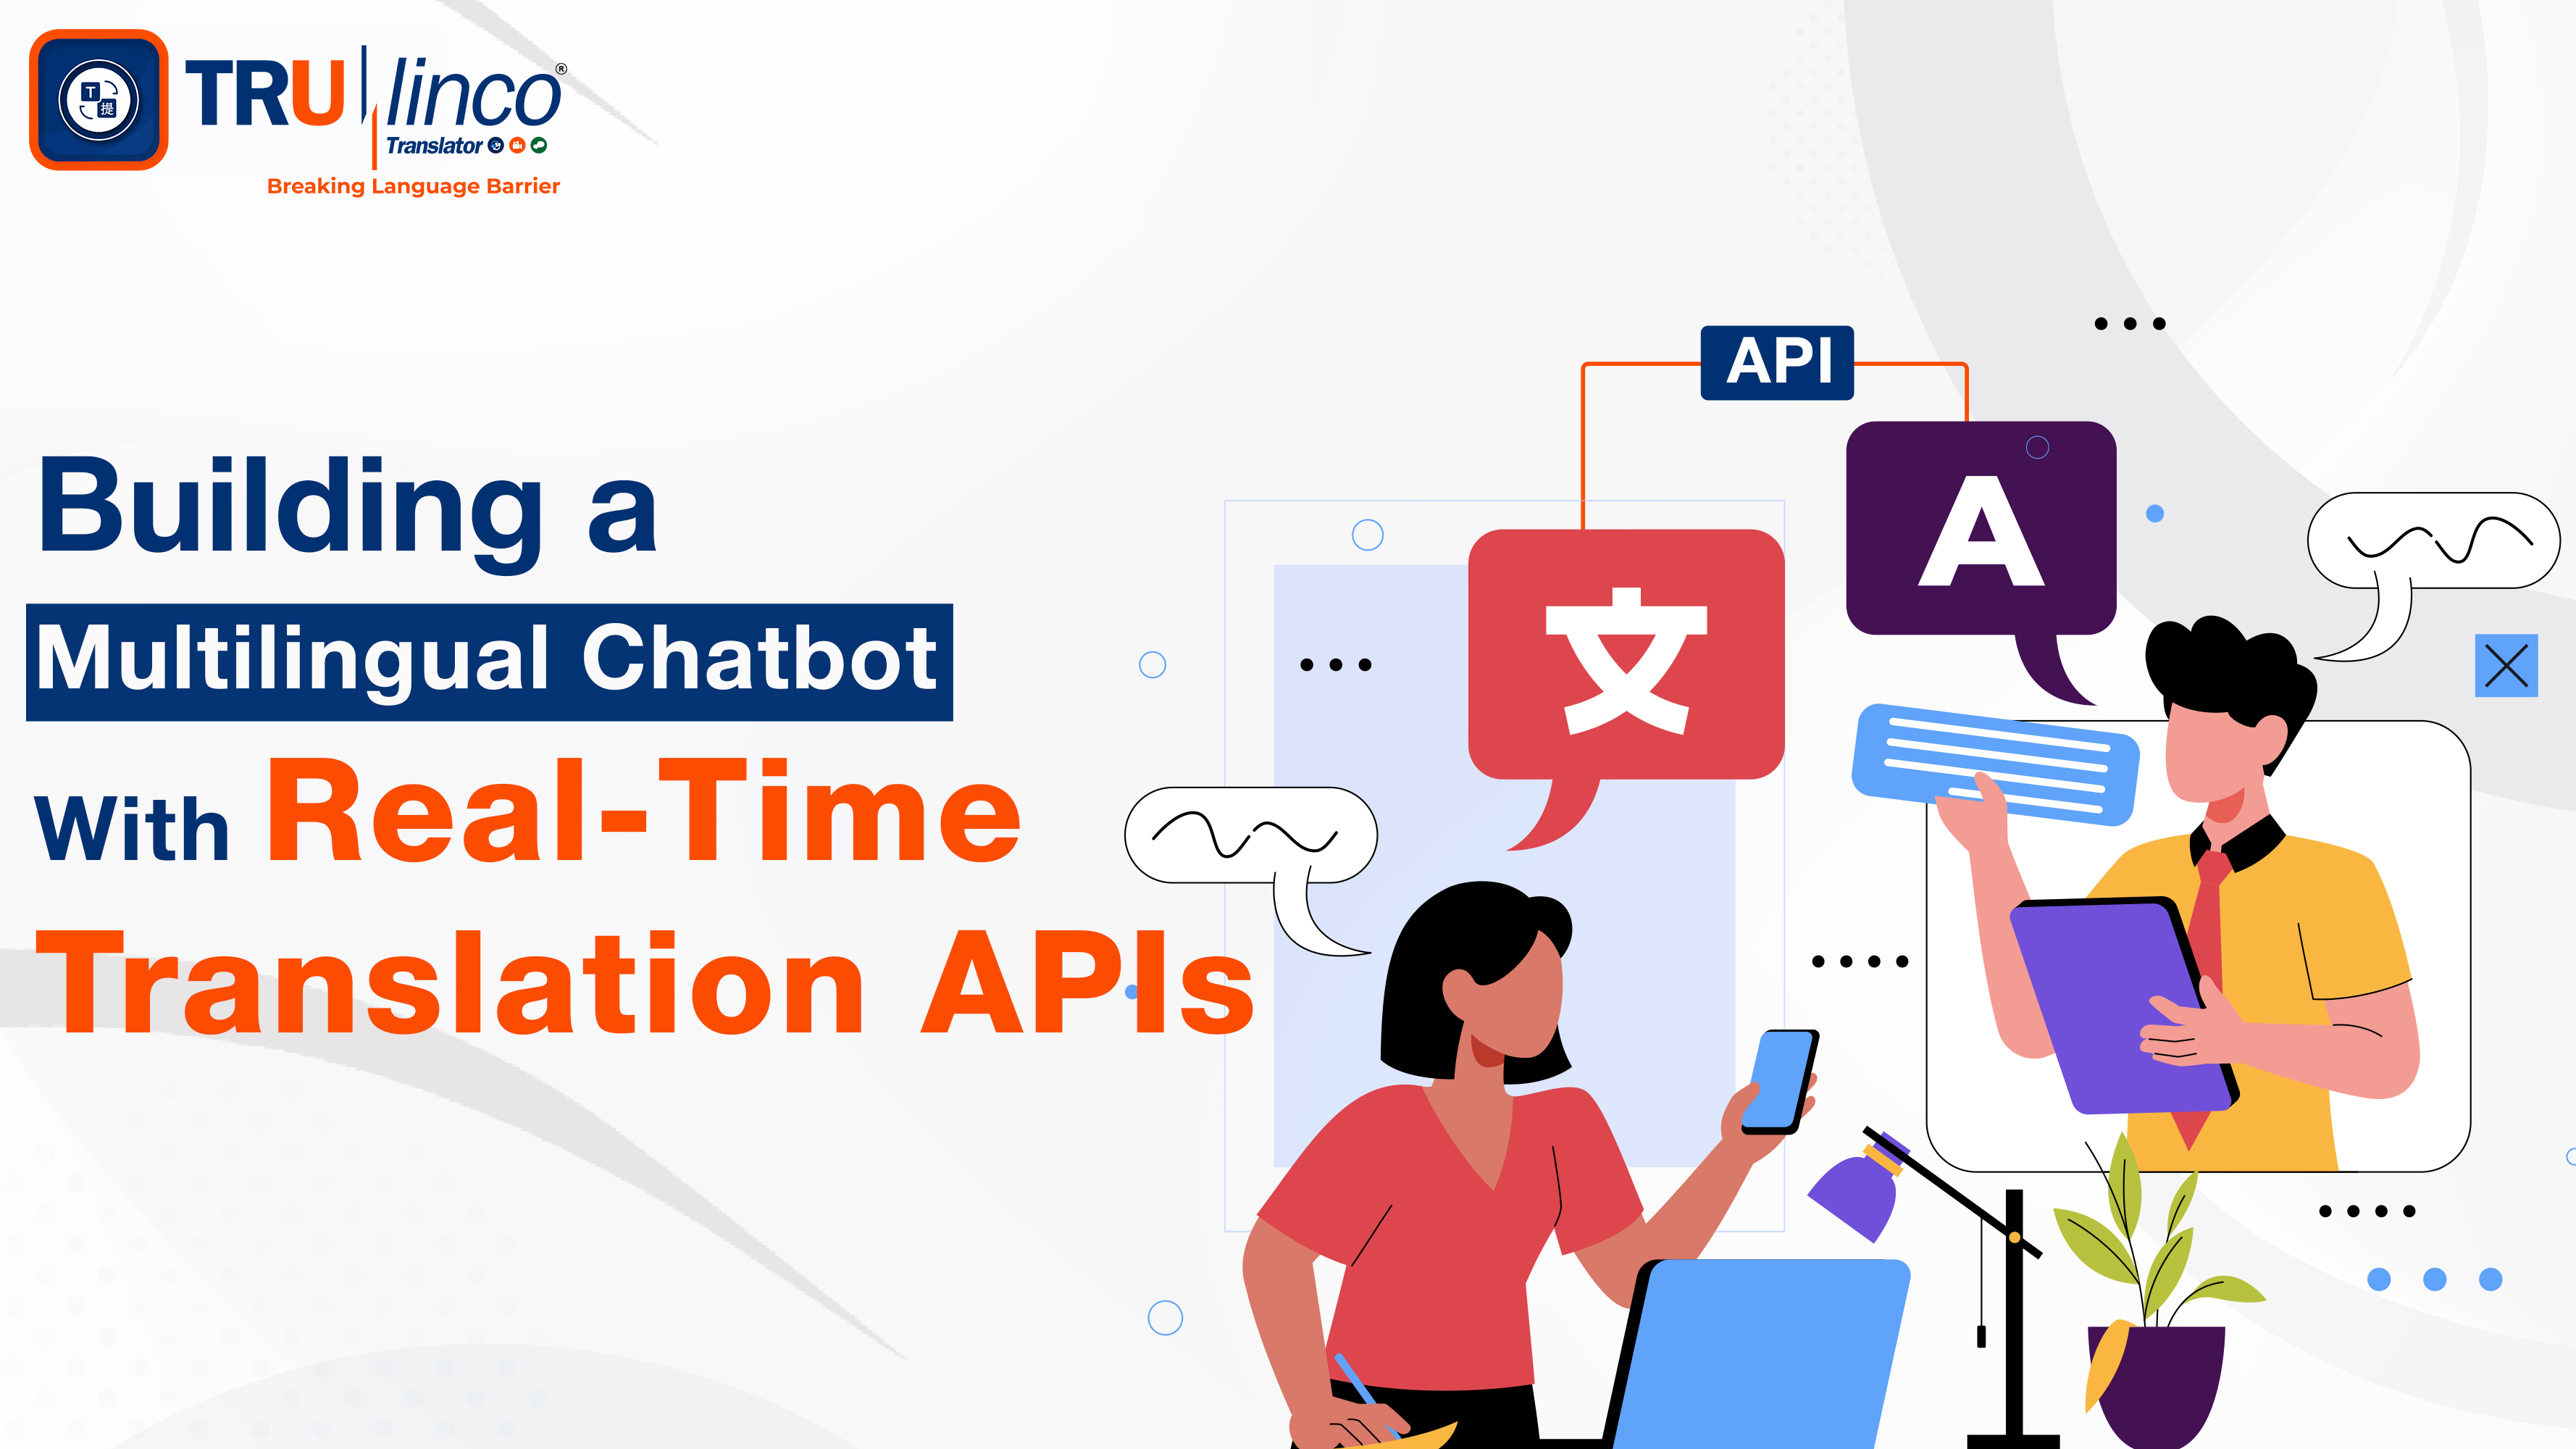 Building a Multilingual Chatbot with Real-Time Translation APIs